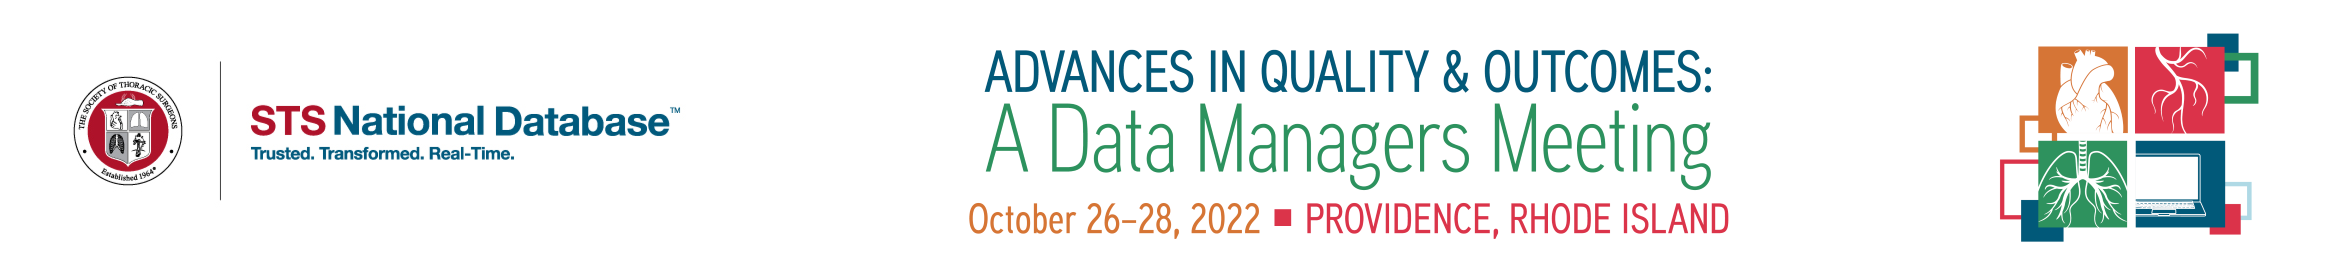 2022 Advances in Quality & Outcomes: A Data Managers Meeting Main banner